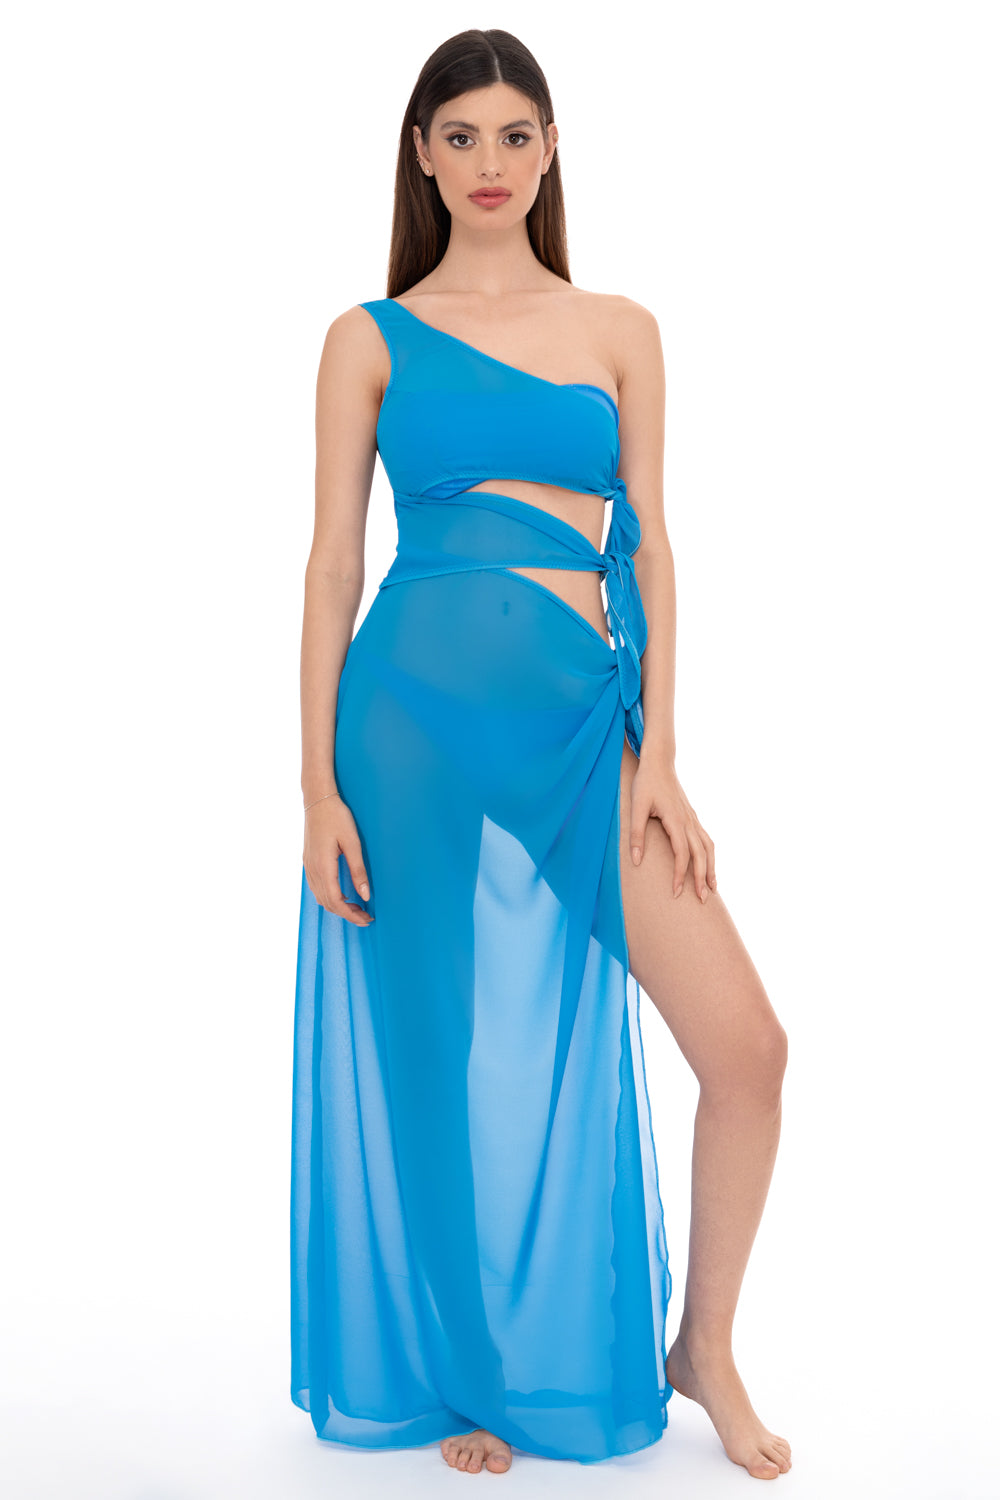 Out of water Magali Ocean dress